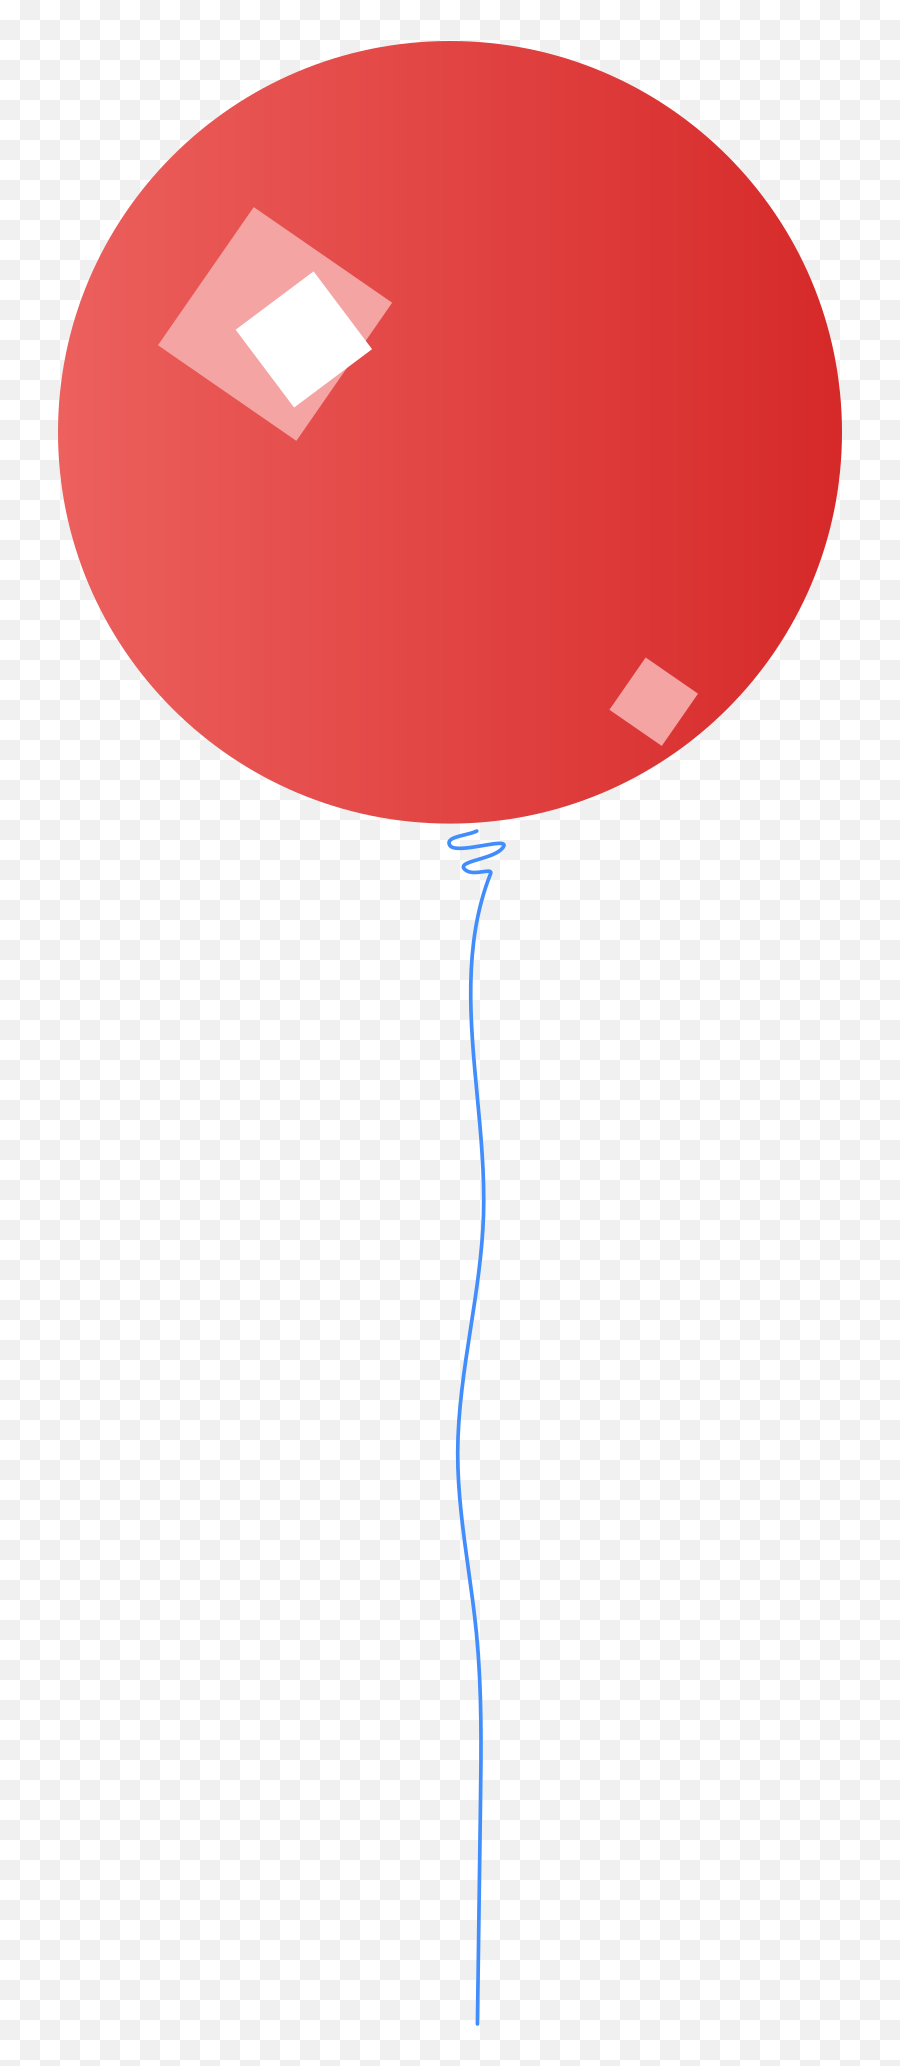 Flying Balloon Clipart Illustrations U0026 Images In Png And Svg Emoji,Ballon Clipart